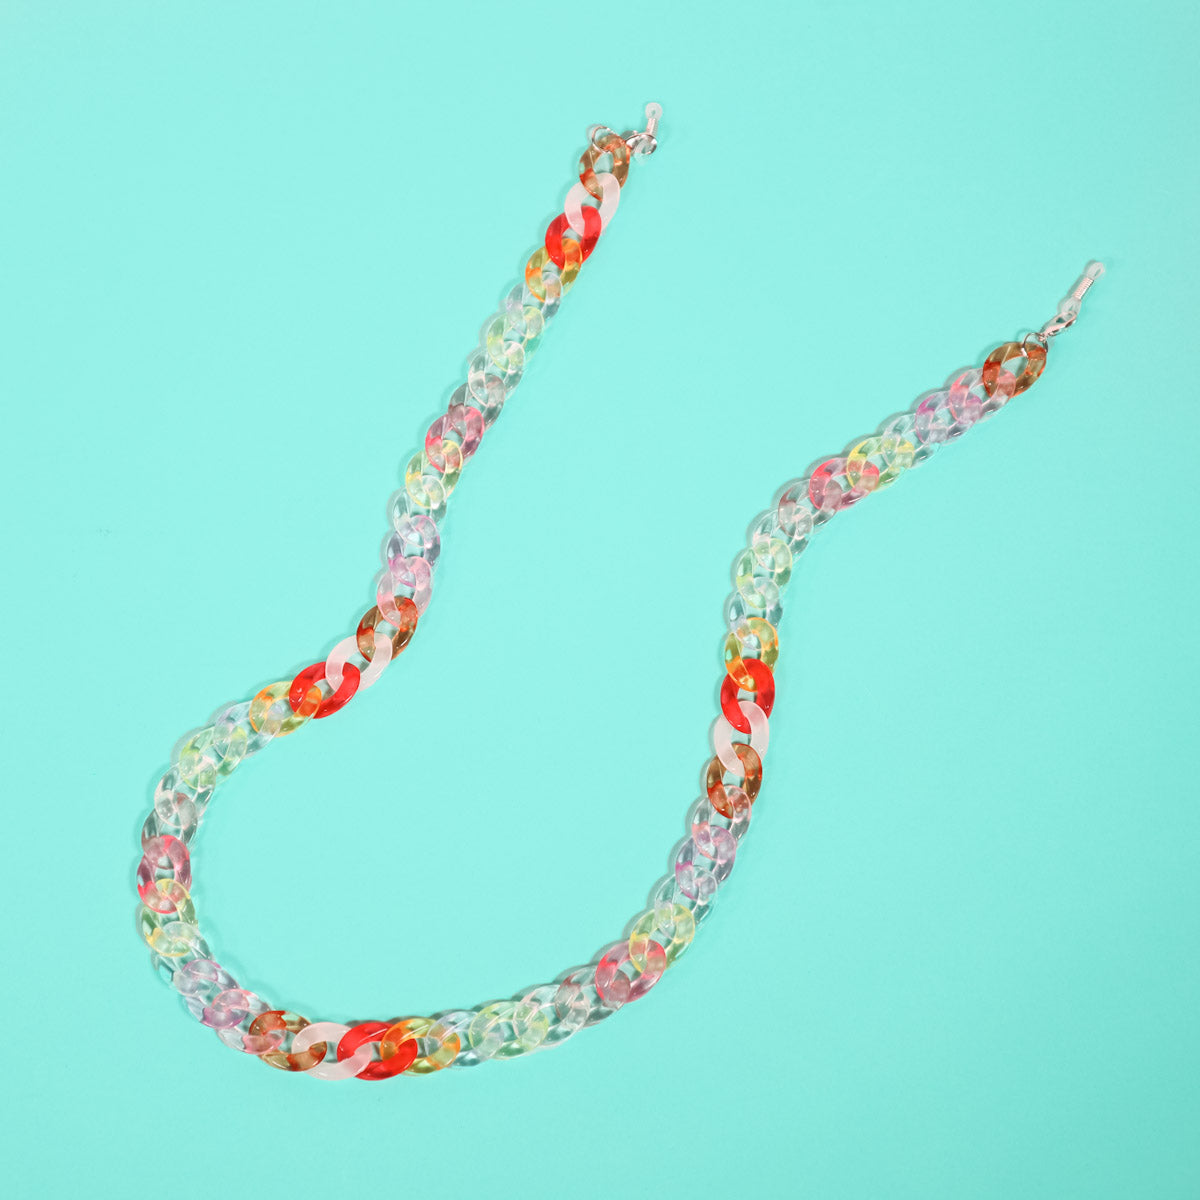 Flat lay of multi coloured chain link glasses chain. 